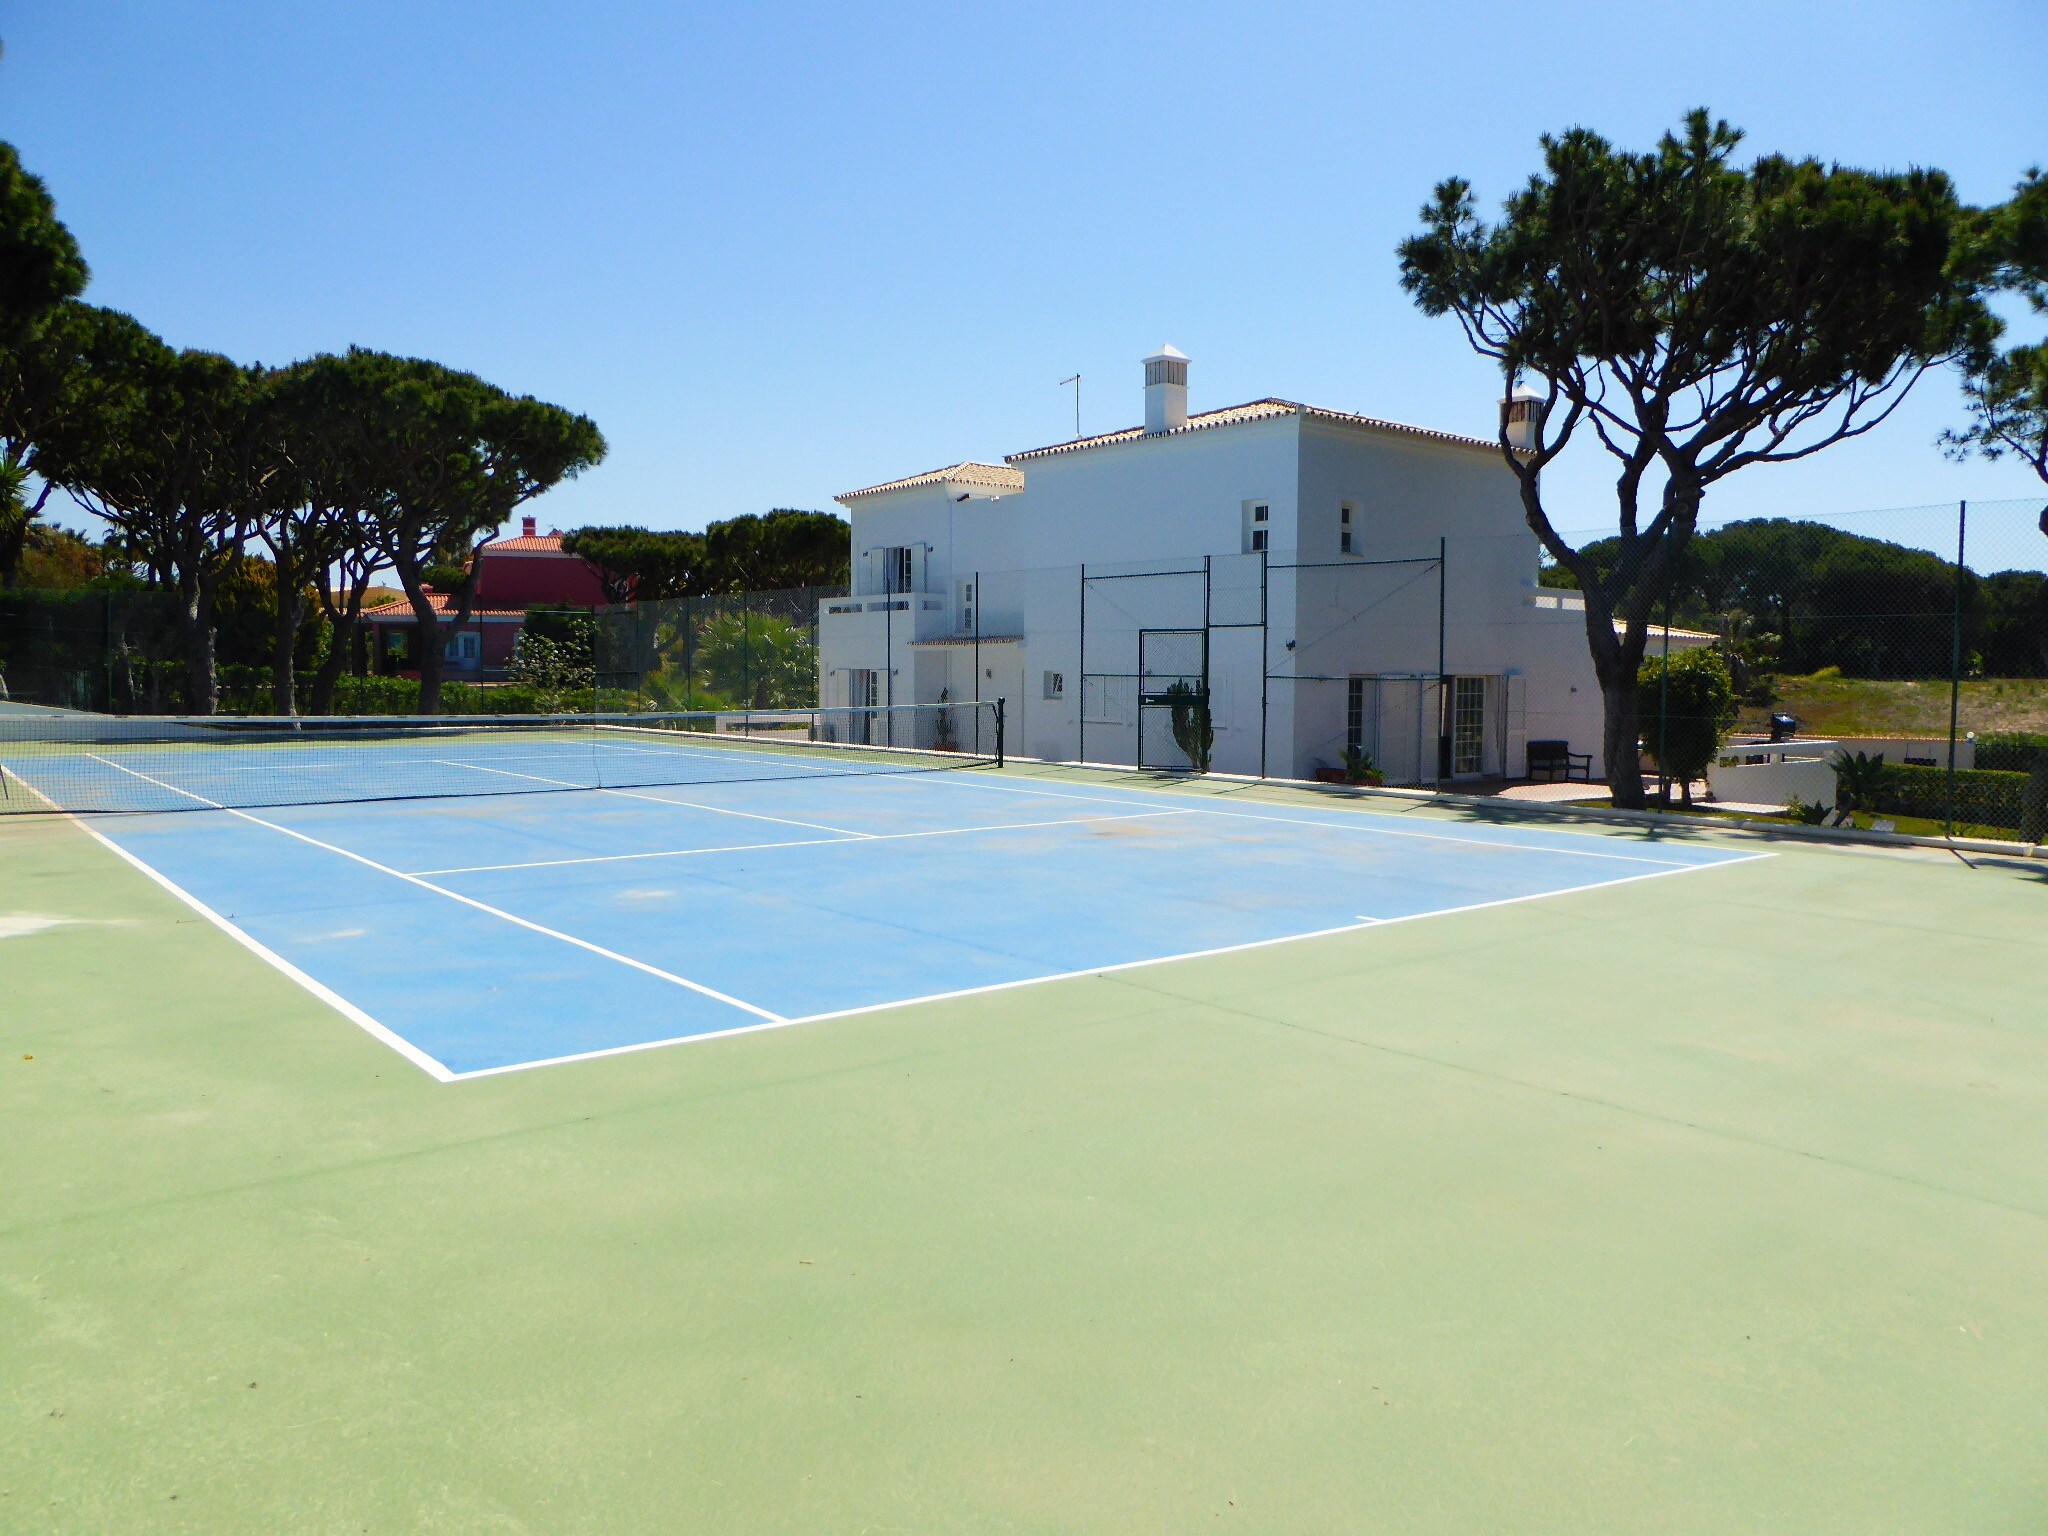 Tennis court and back of the house.